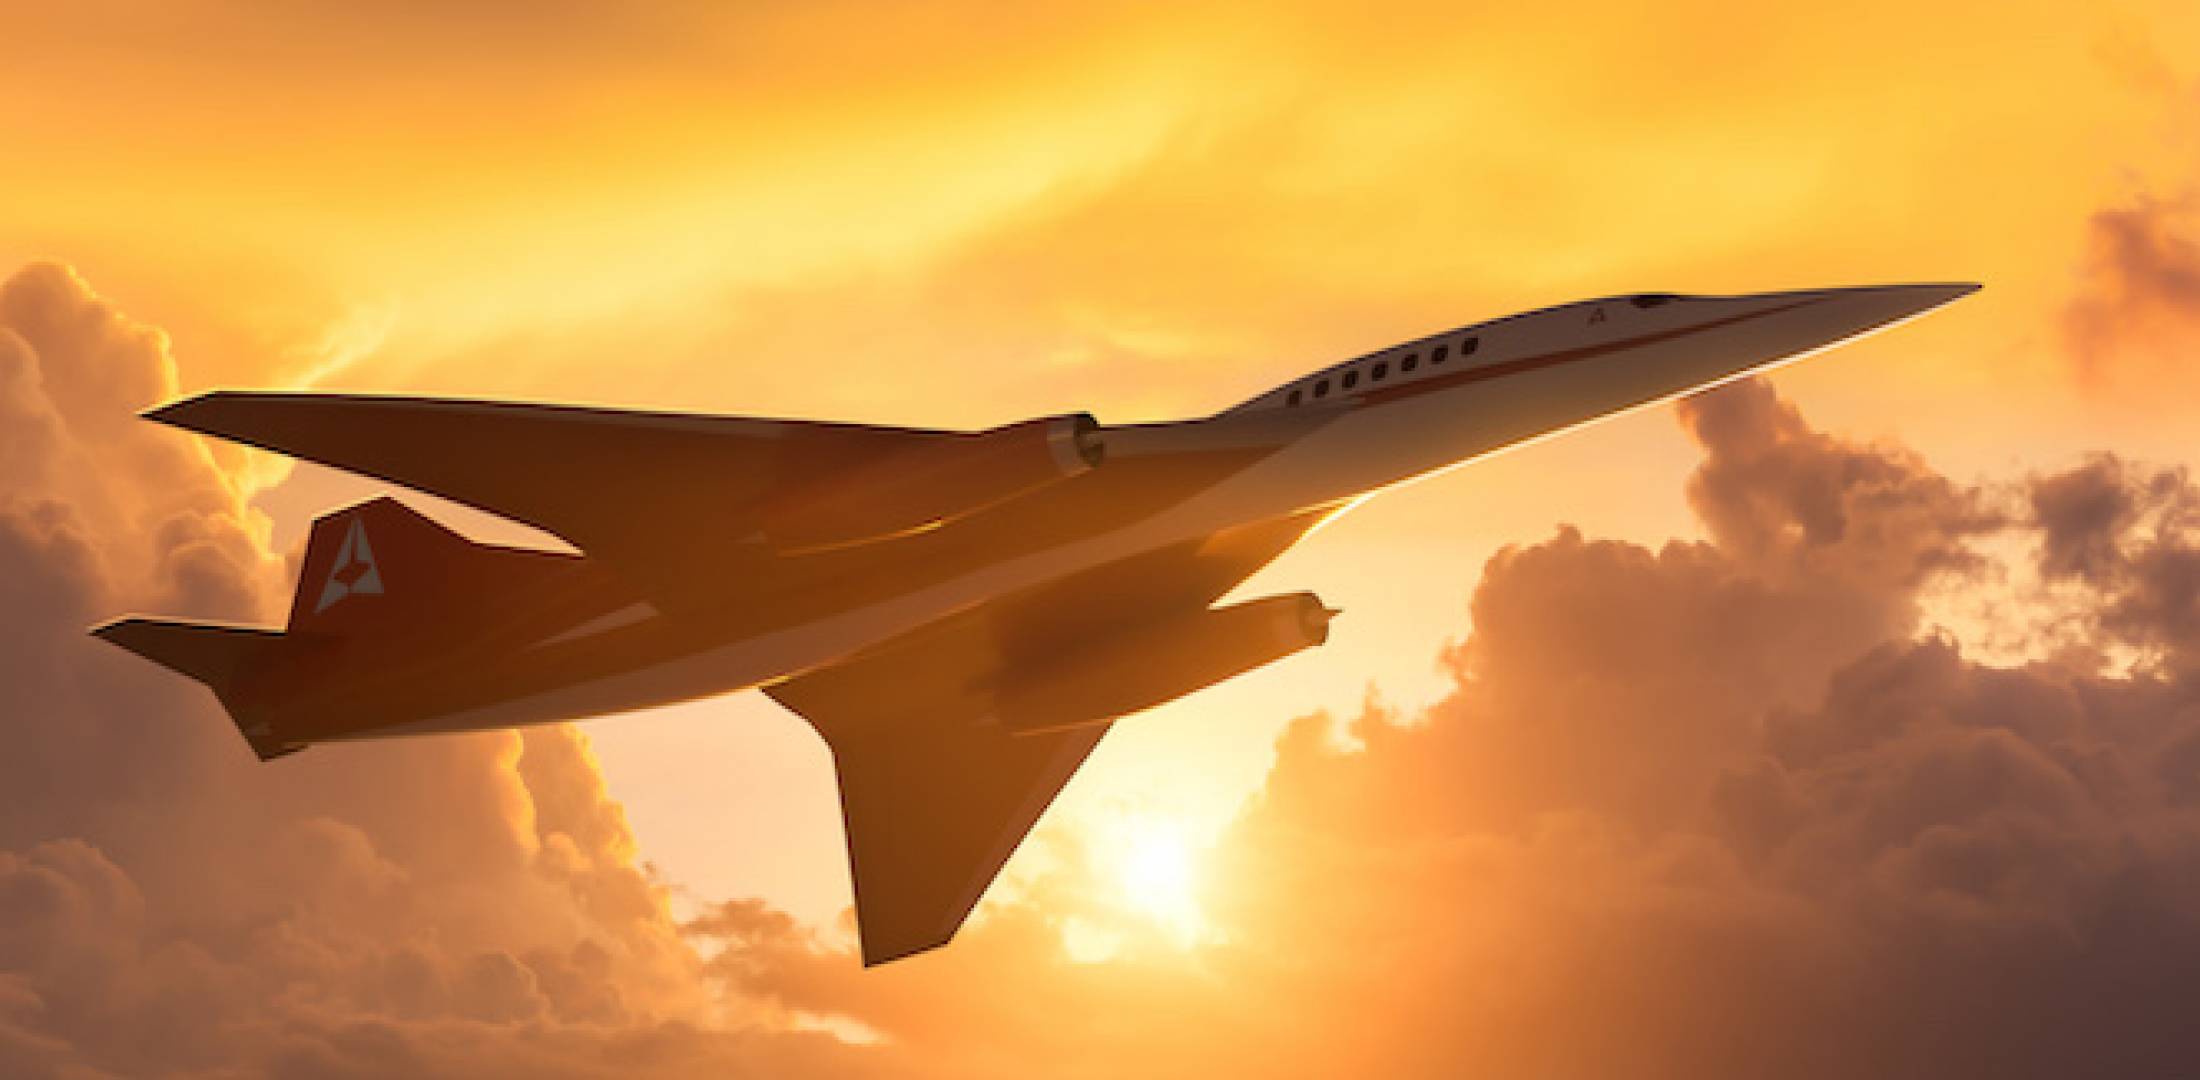 Digital rendering of Aerion's AS2 supersonic business jet shown in flight (Photo: Aerion)